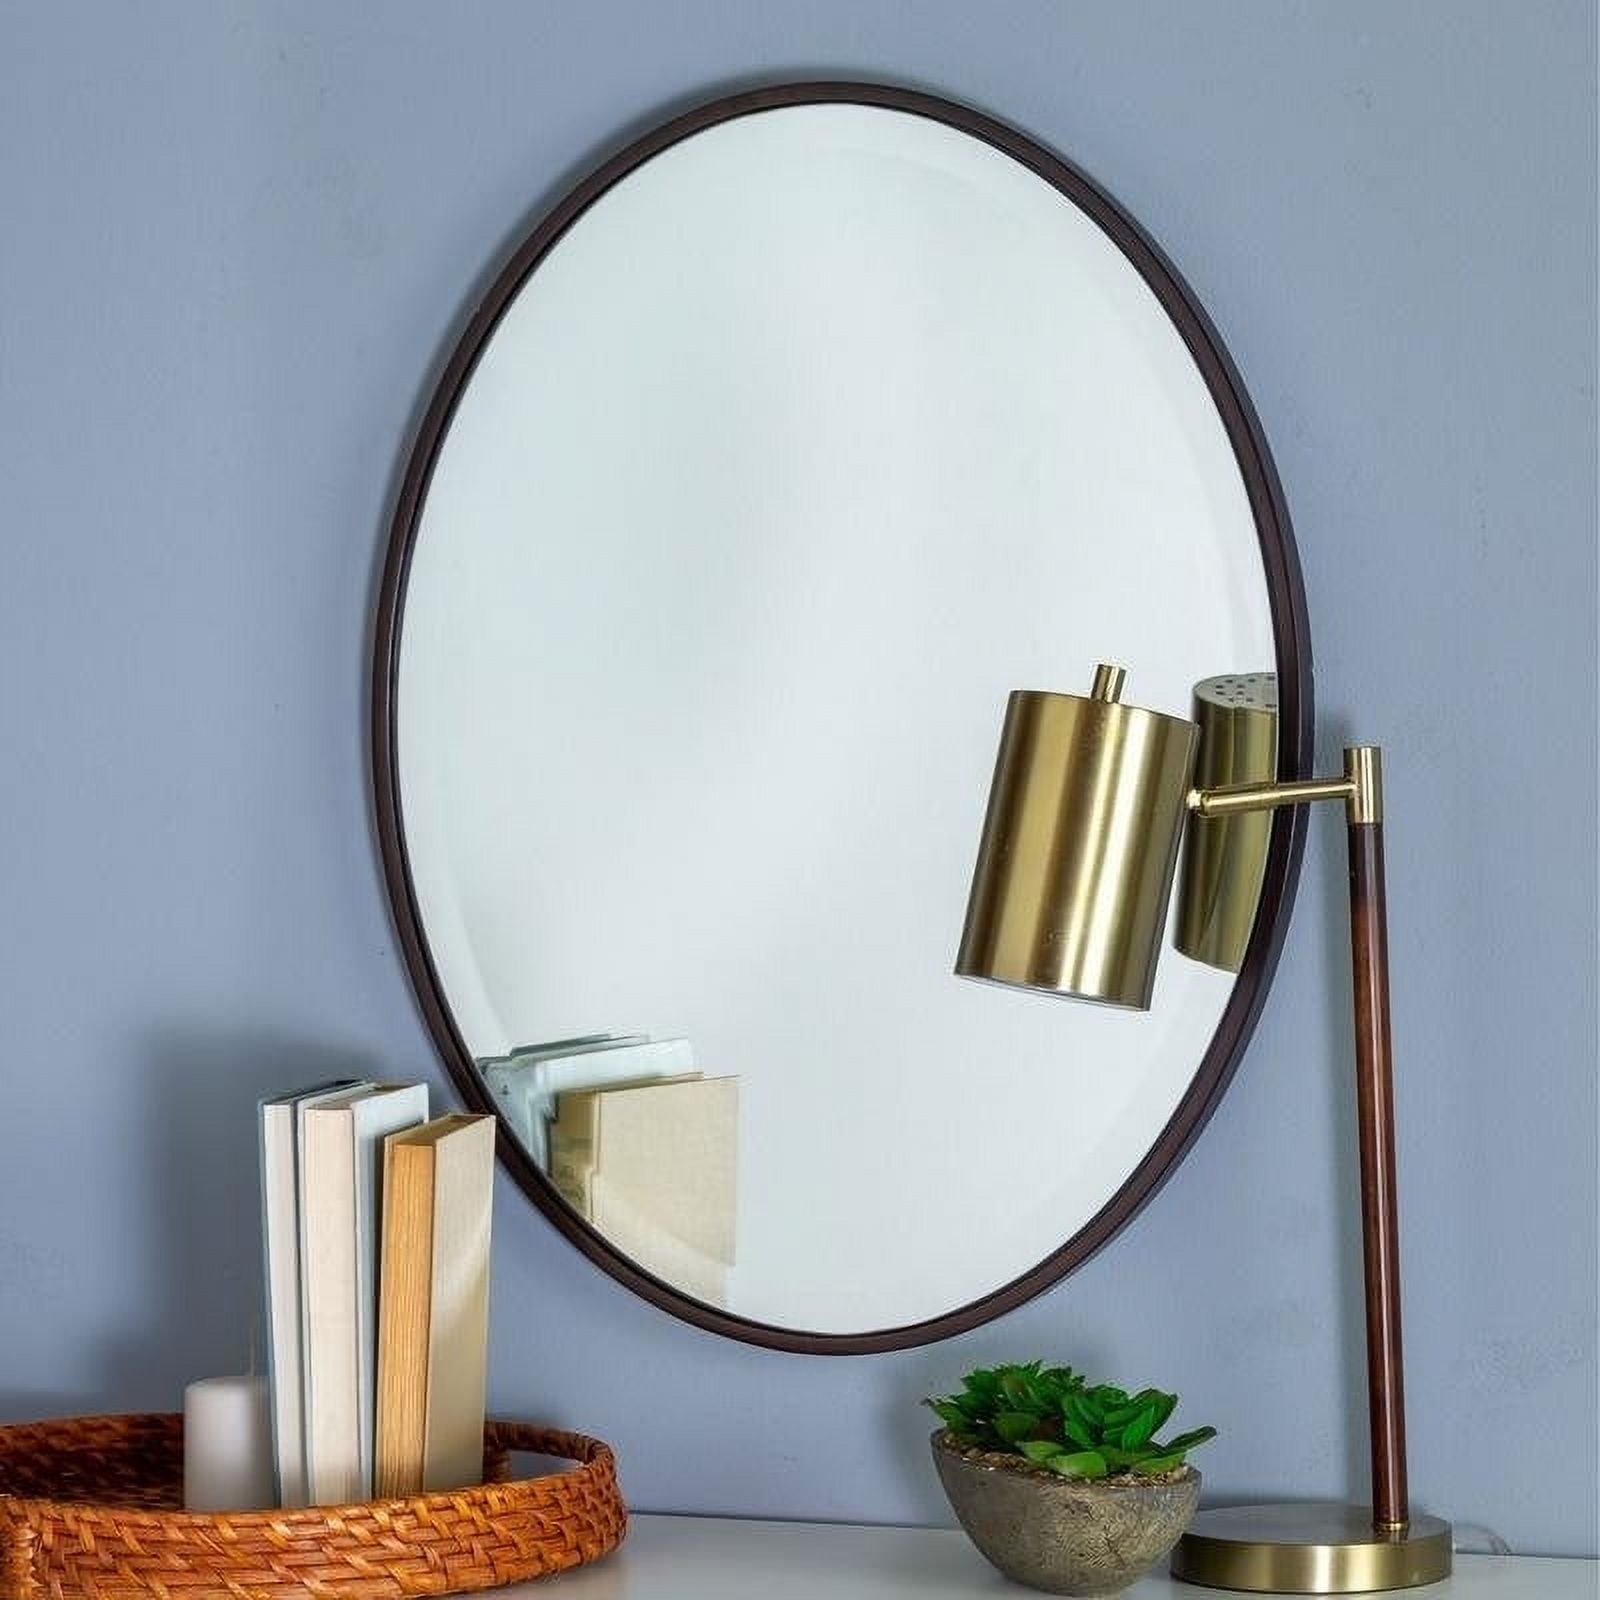 22 x 28 in. Seymour Oval Mirror - image 2 of 2